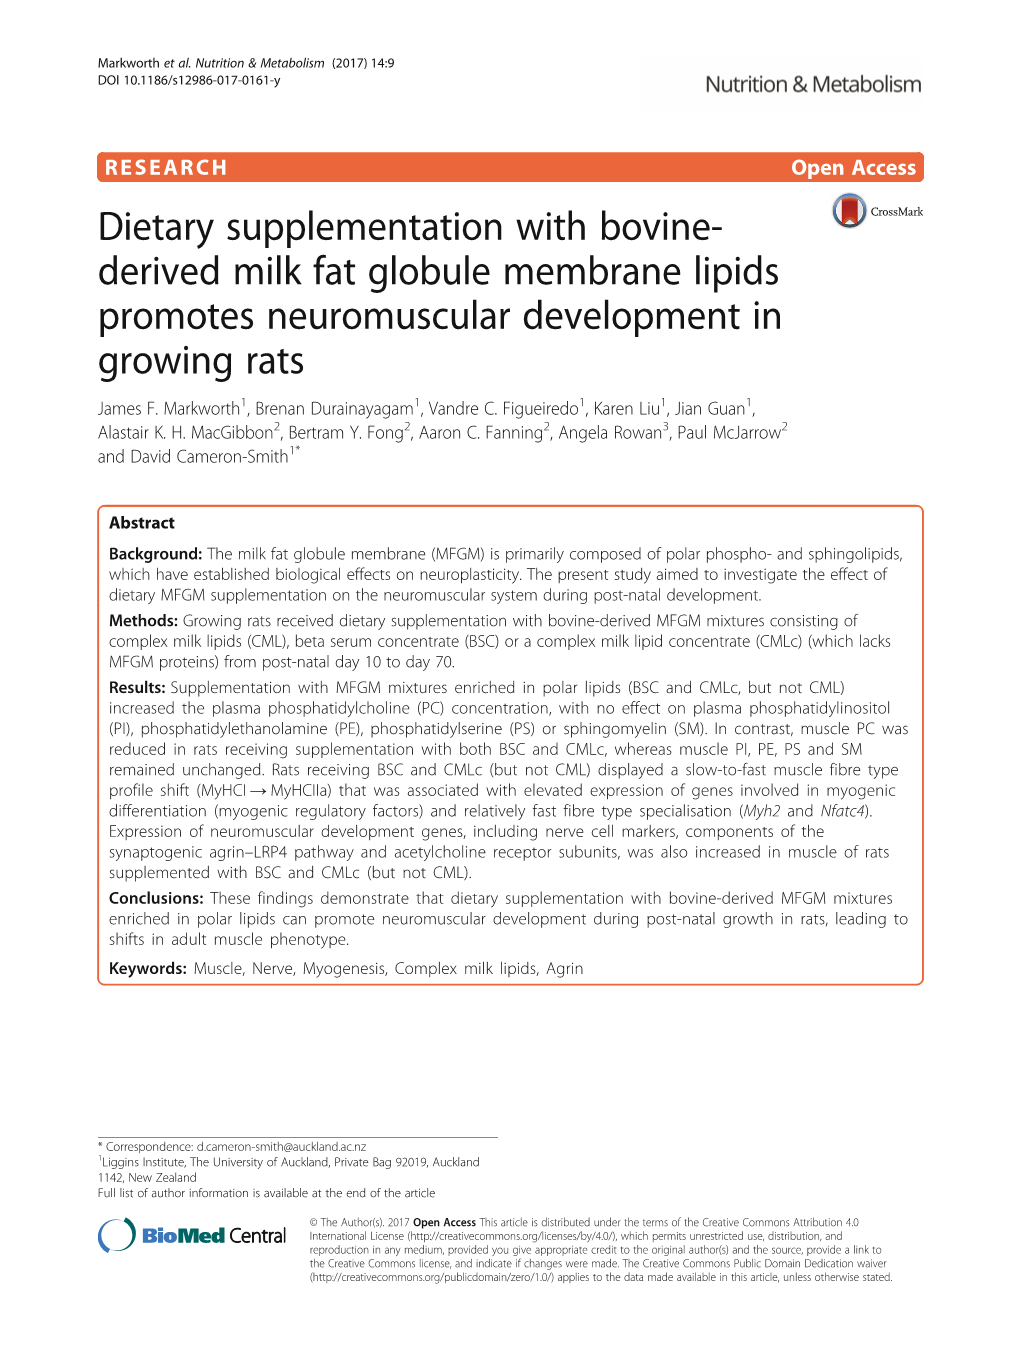 Dietary Supplementation with Bovine-Derived Milk Fat Globule Membrane Lipids Promotes Neuromuscular Development in Growing Rats